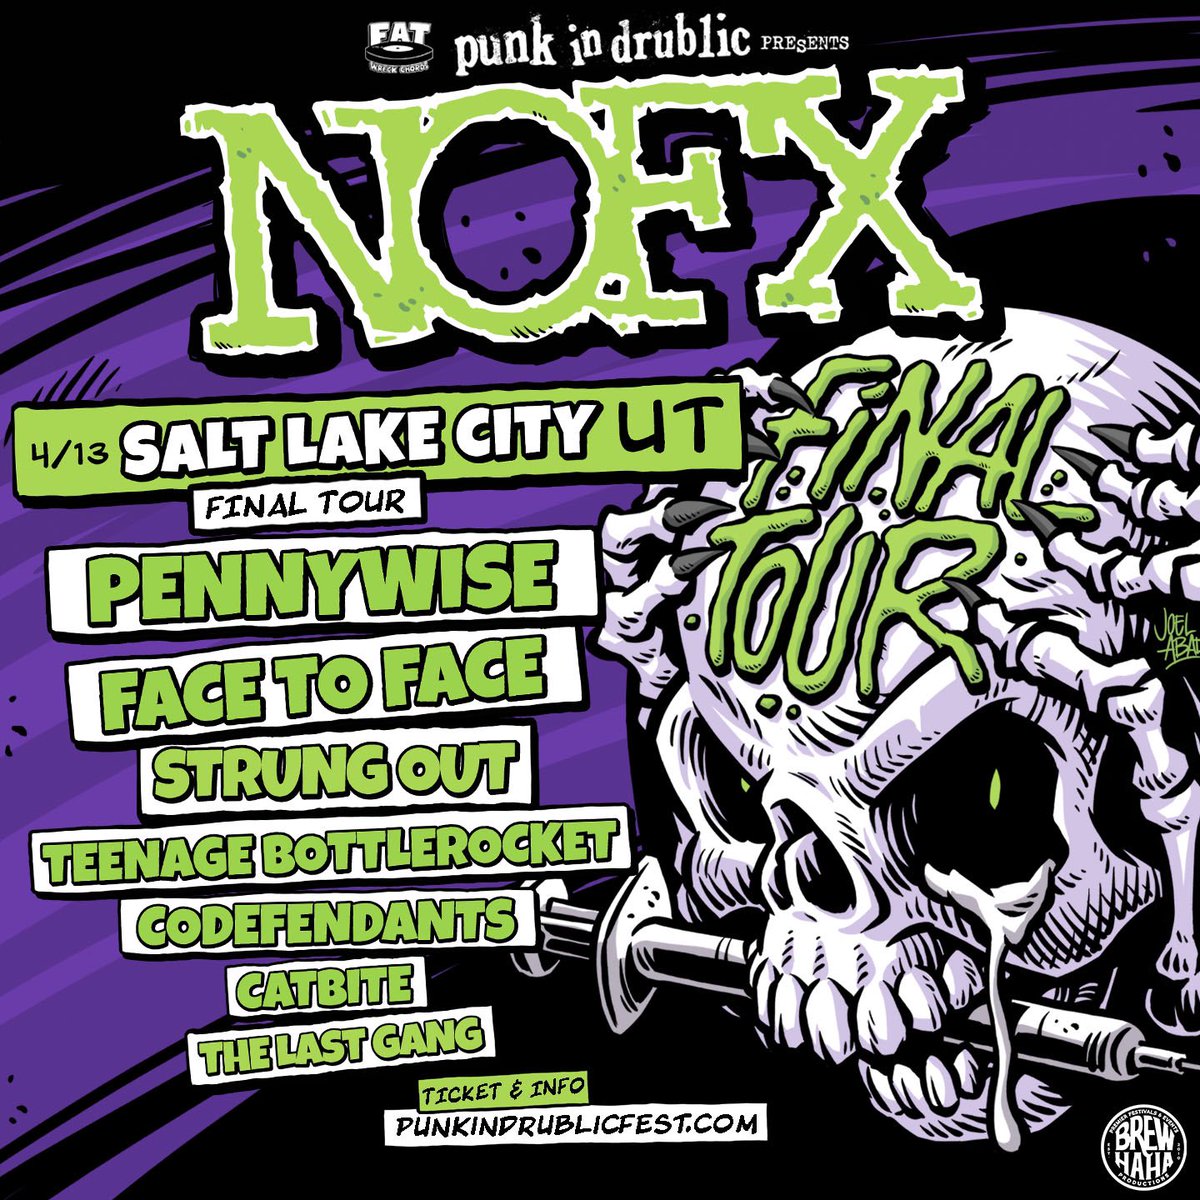 Salt Lake City! We’ll see you in the pit at Punk in Drublic Fest with @NOFXband, @facetofacemusic, @StrungOut & more on April 13! Tickets on-sale now at punkindrublicfest.com